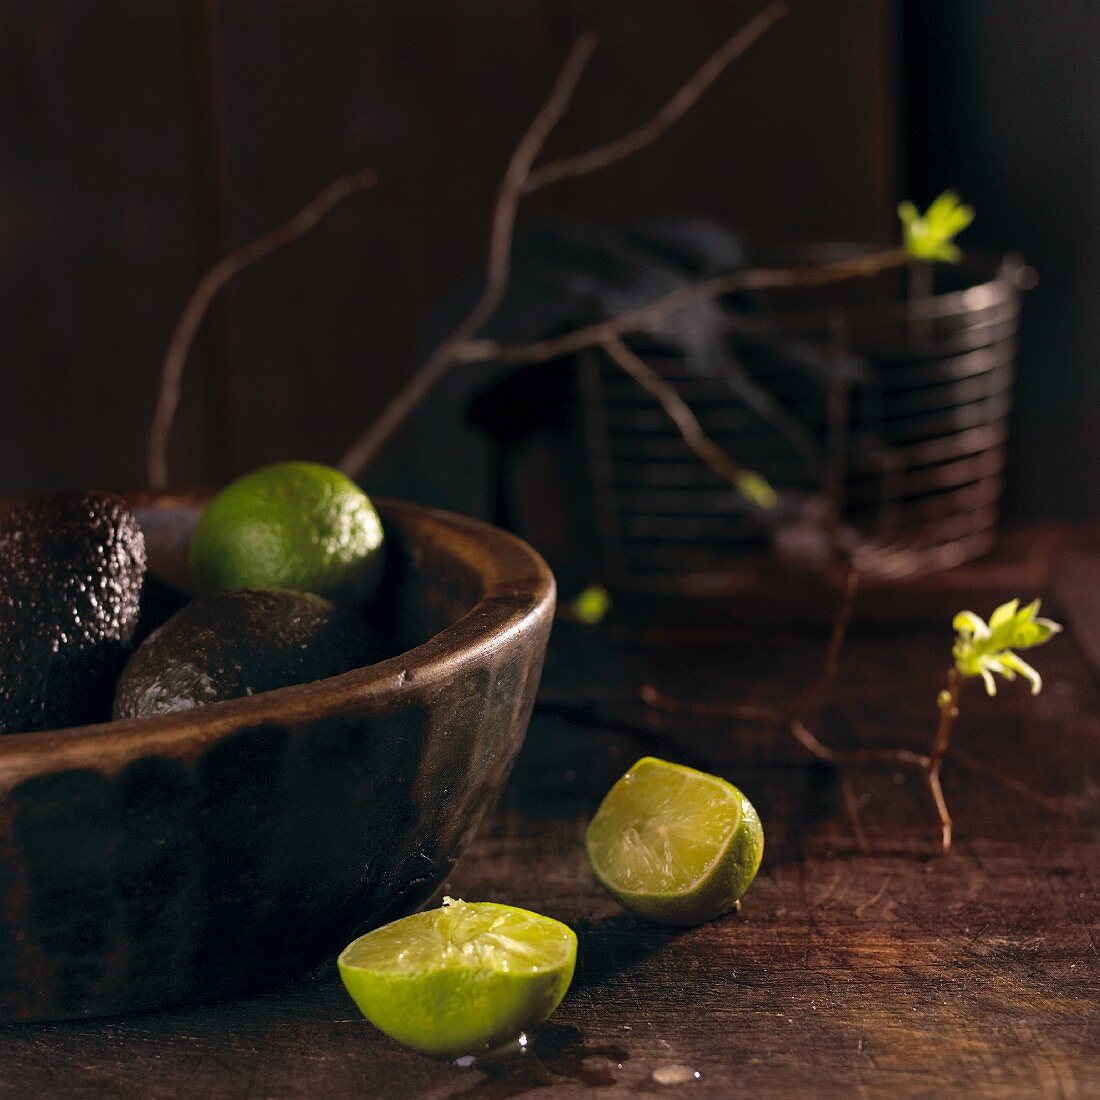 An arrangement of avocados and limes (Mexico)